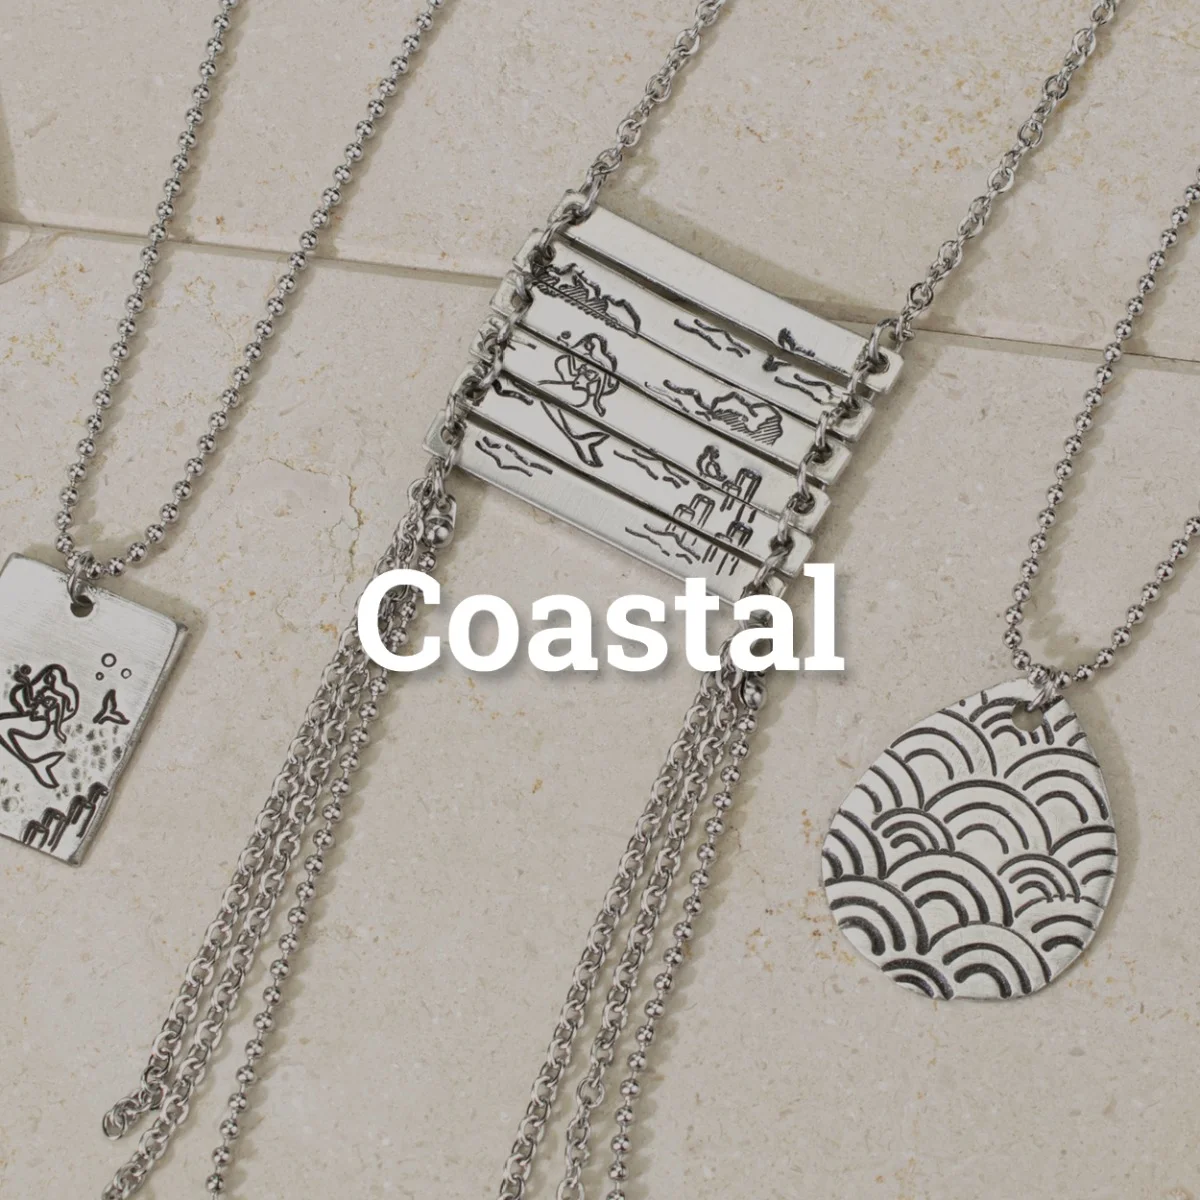 Coastal Collections